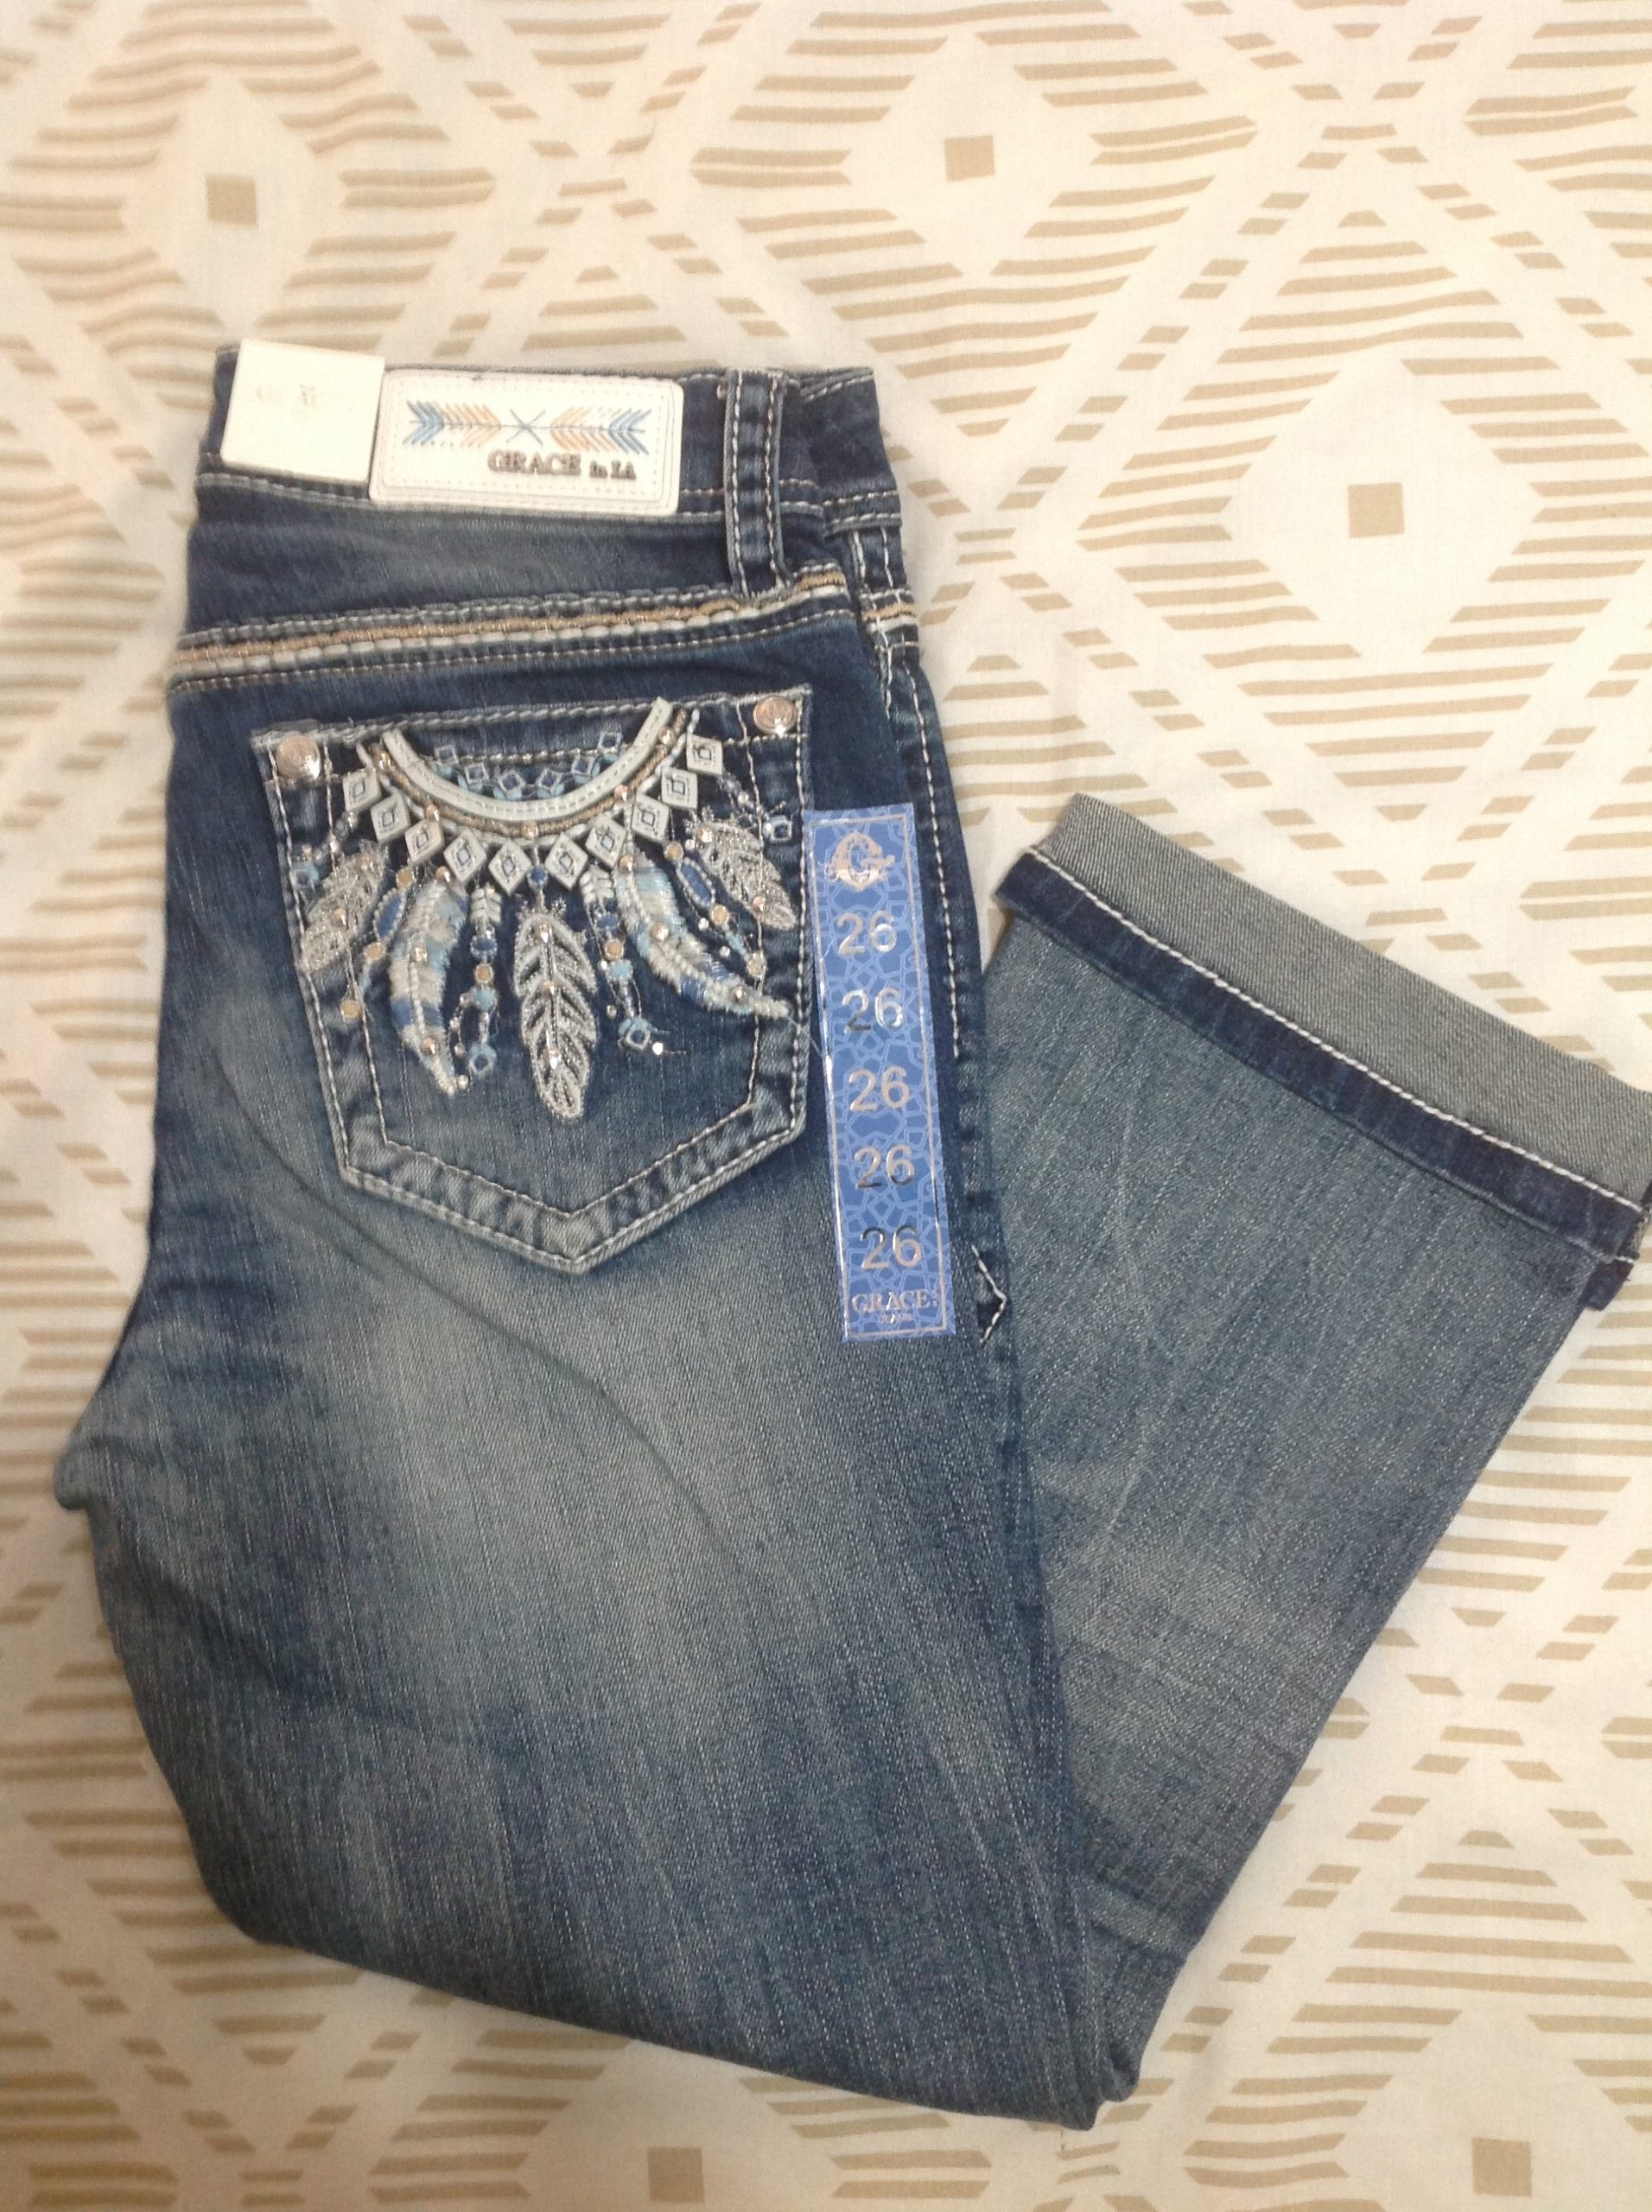 Glad Daisy Bliv ophidset Grace in LA Feather Capris | Sally Jeans